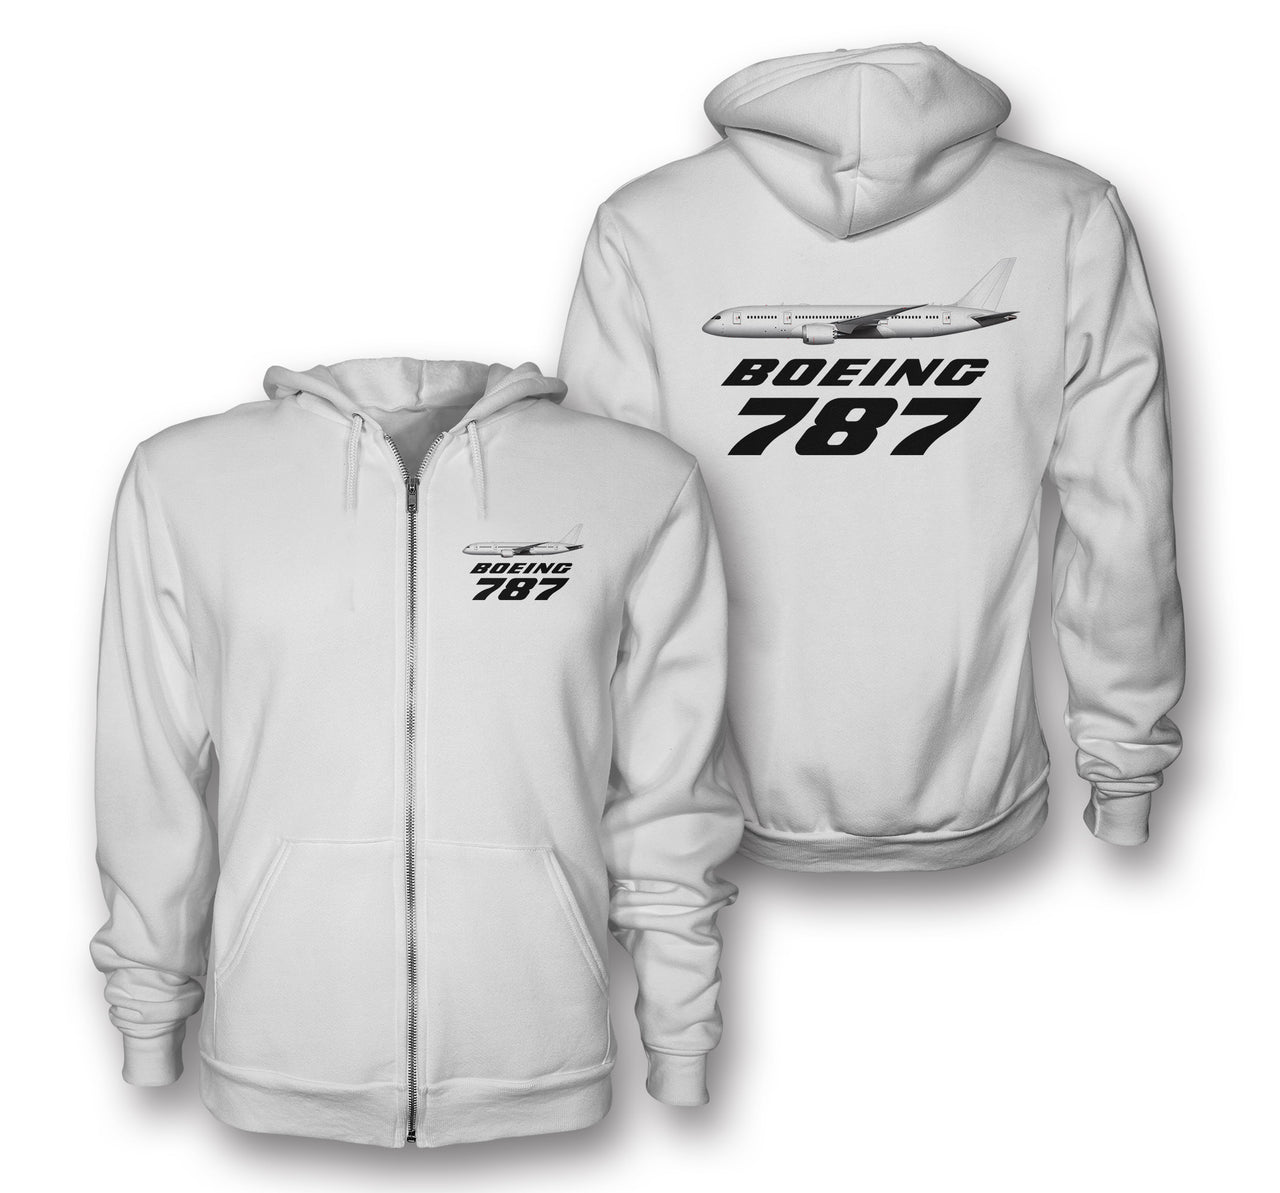 The Boeing 787 Designed Zipped Hoodies